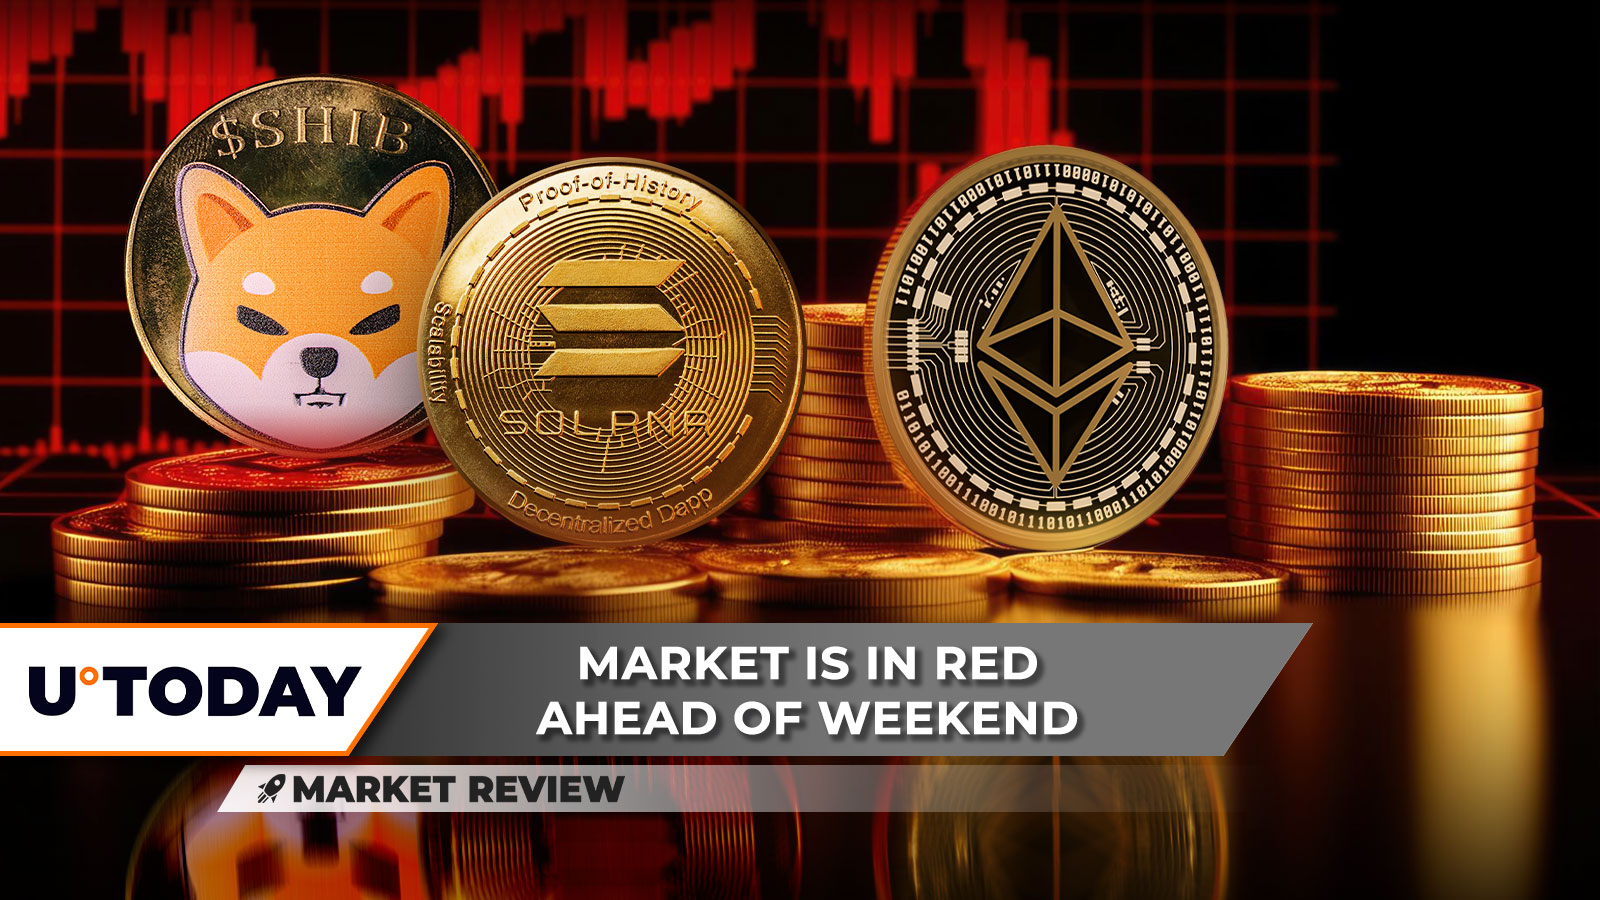 Shiba Inu (SHIB) Rapidly Breaks Down, Ethereum (ETH) Loses Traction, While Solana (SOL) Presents Hidden Opportunity